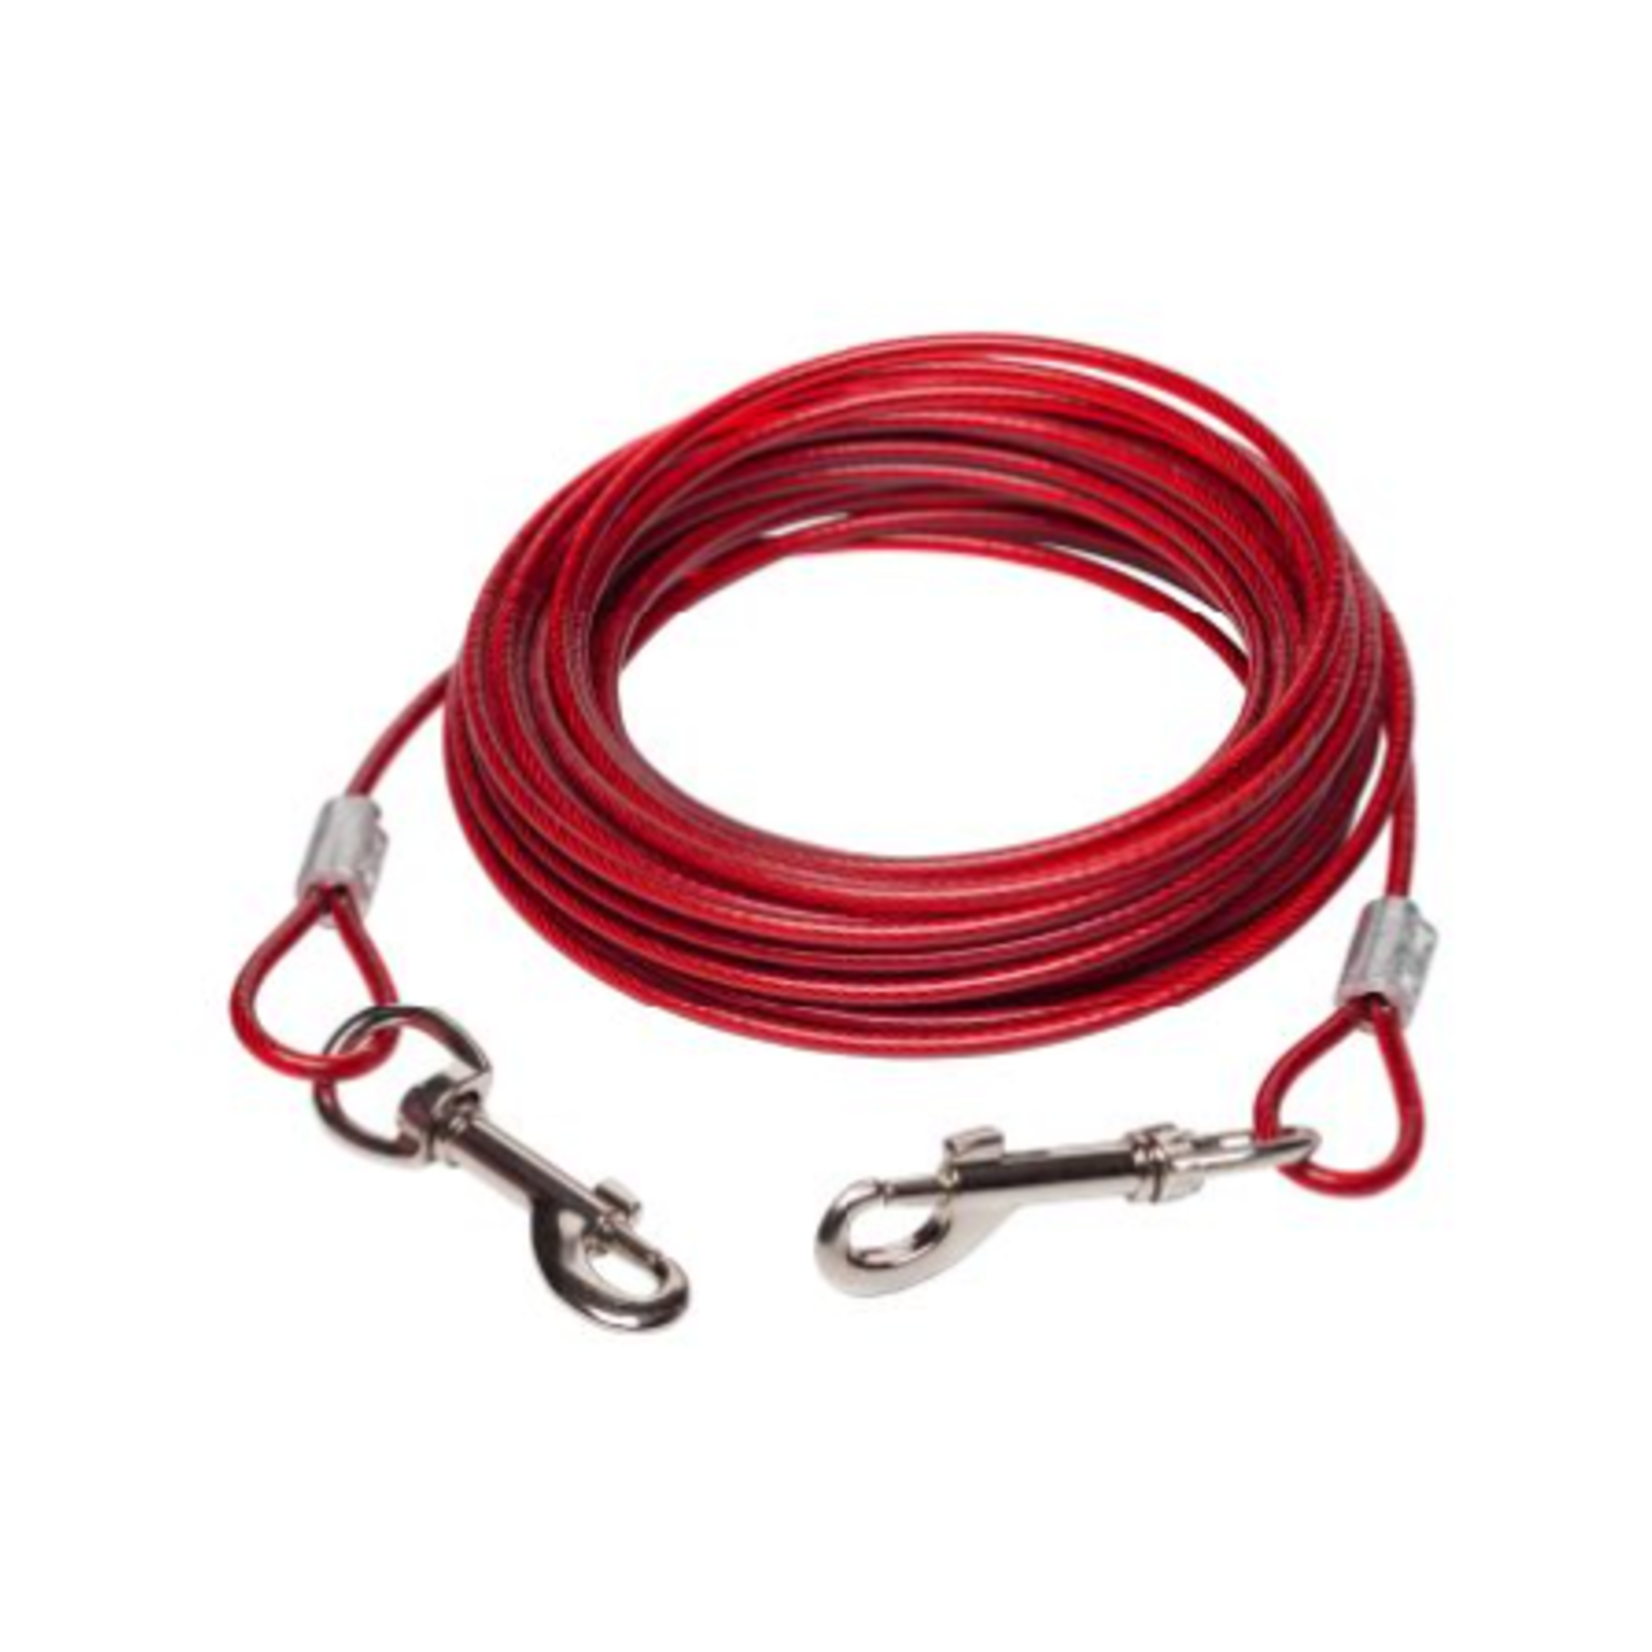 bud'z Dog Cable - 20 ft - up to 60 lbs